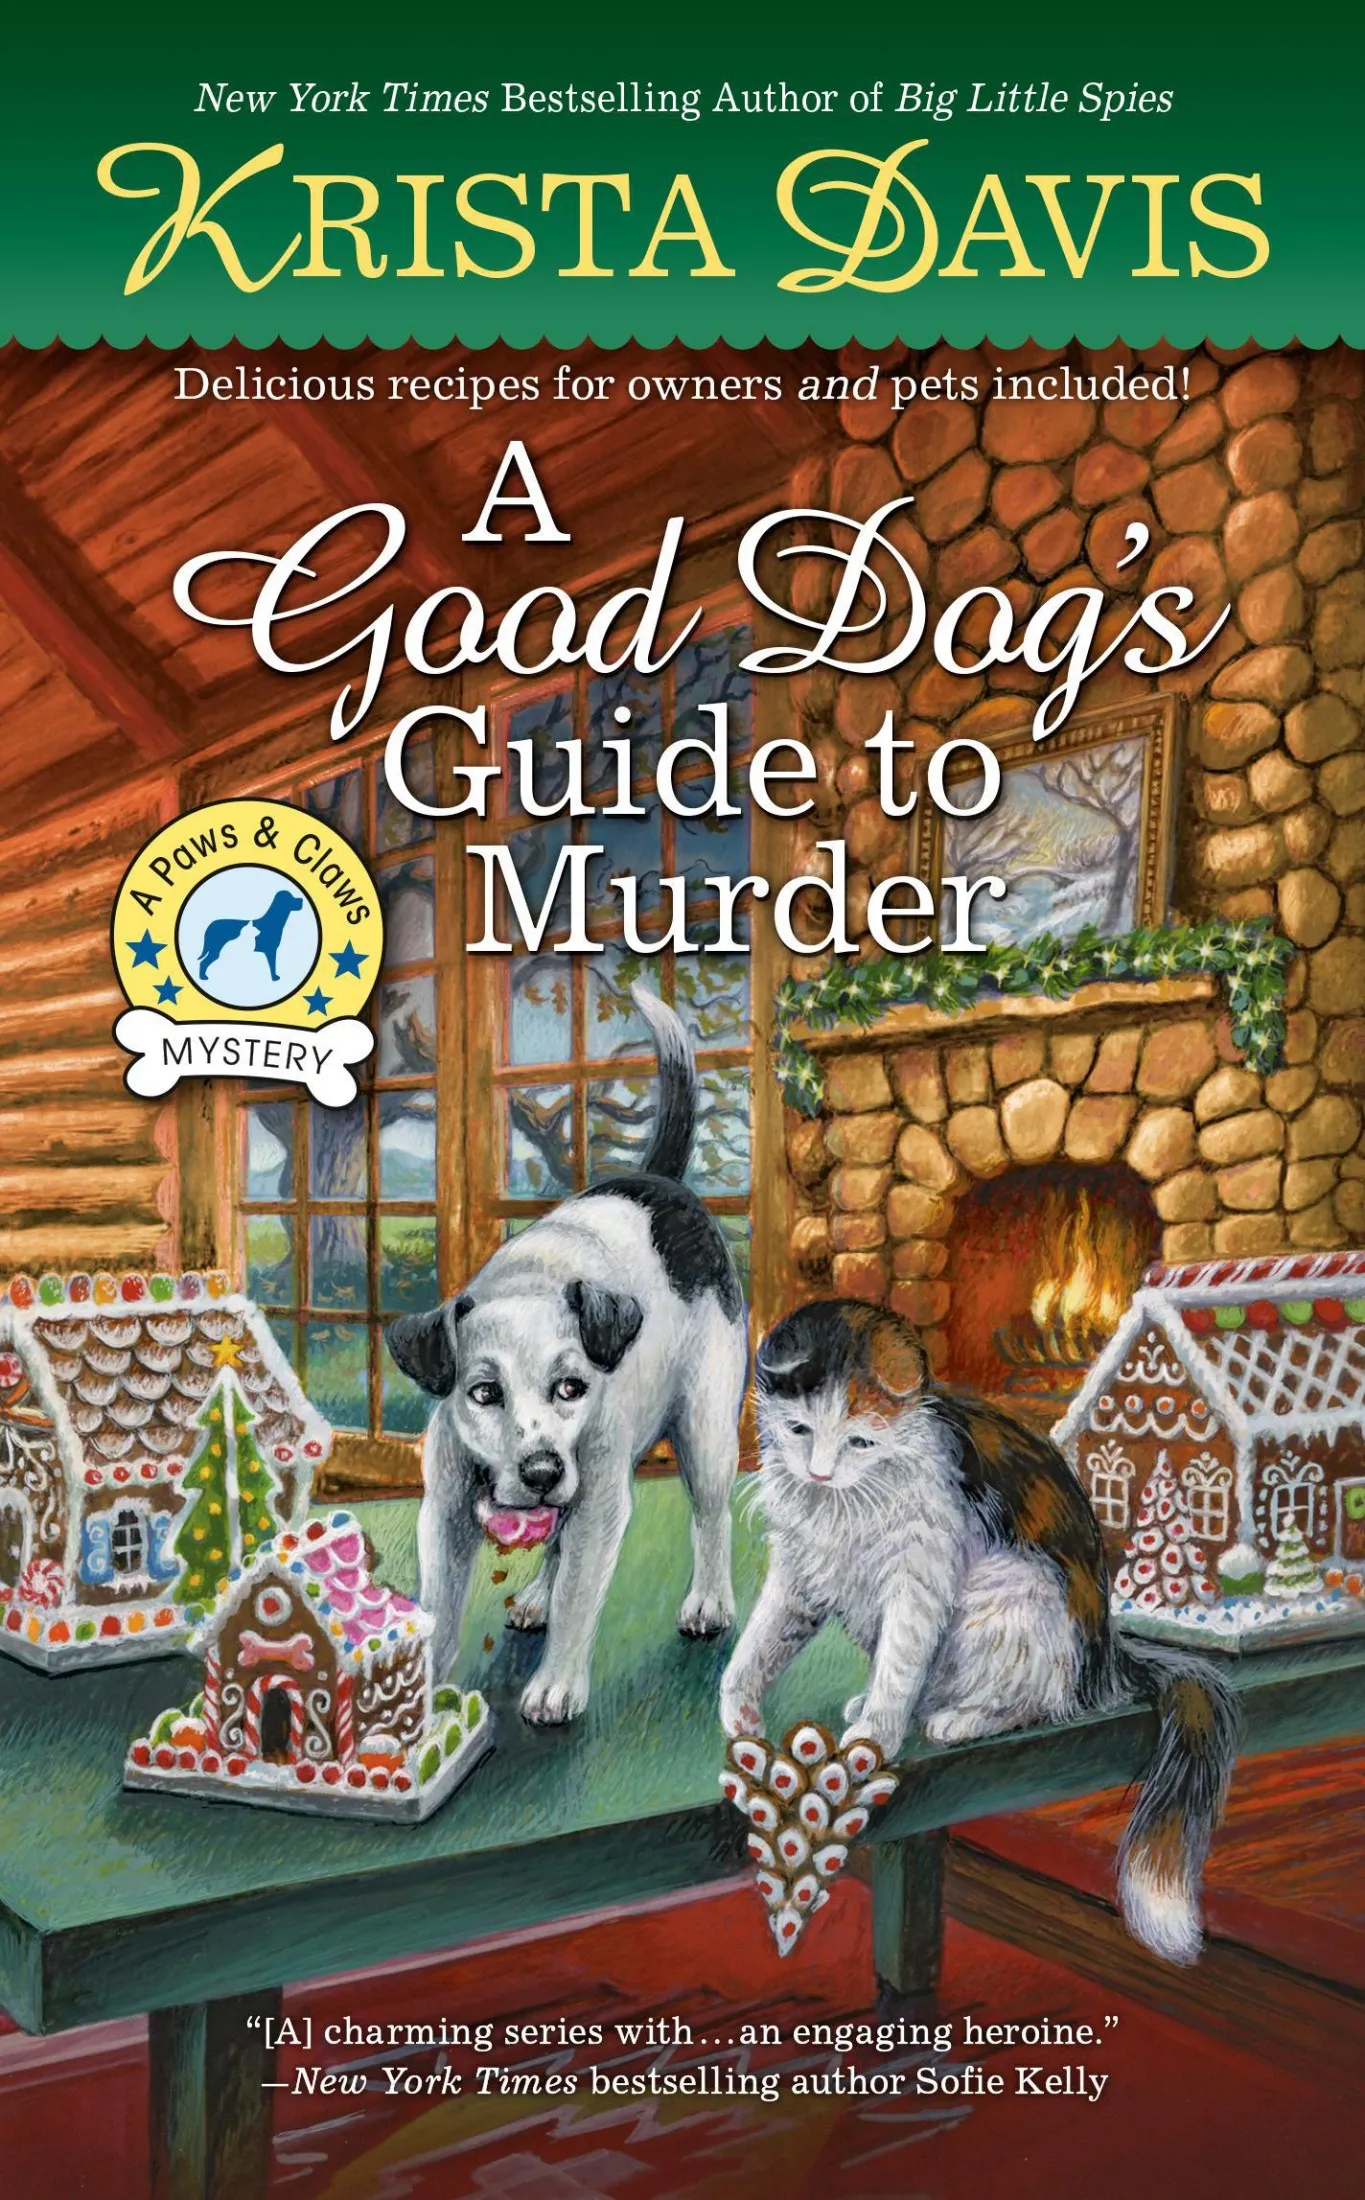 A Good Dog's Guide to Murder (A Paws & Claws Mystery #8)